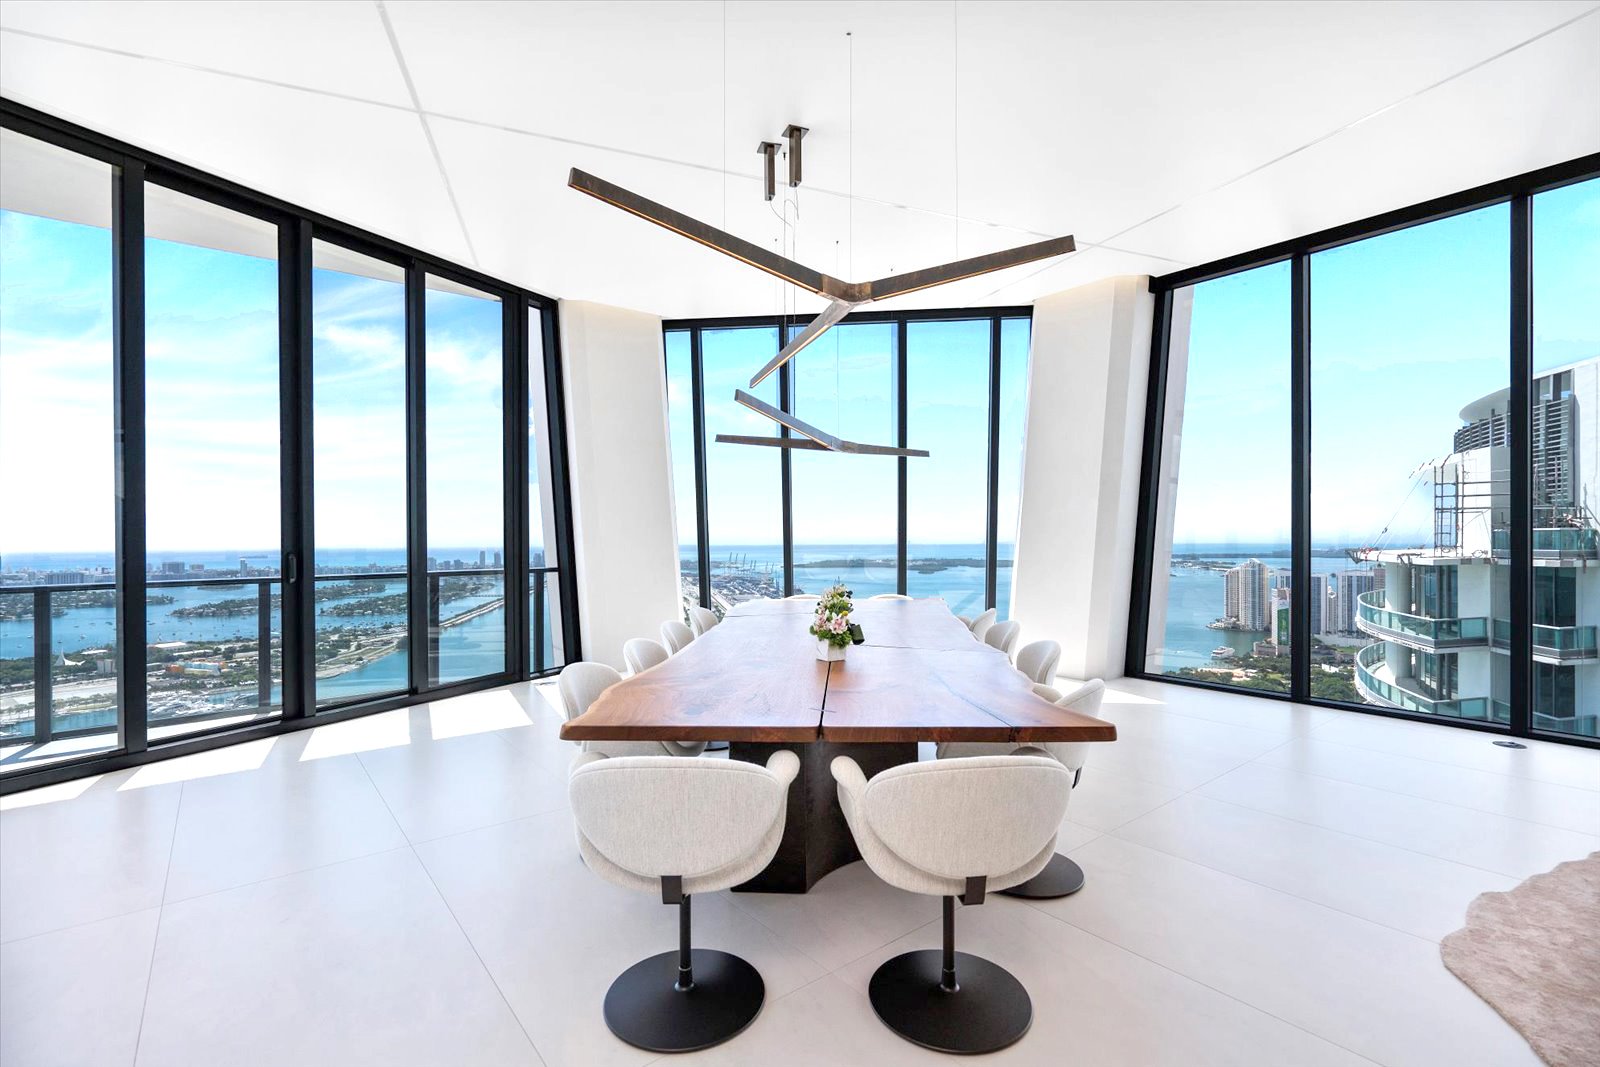 Step Inside A Full Floor Penthouse At The Zaha Hadid-Designed One Thousand Museum Asking $28 Million 8.jpg